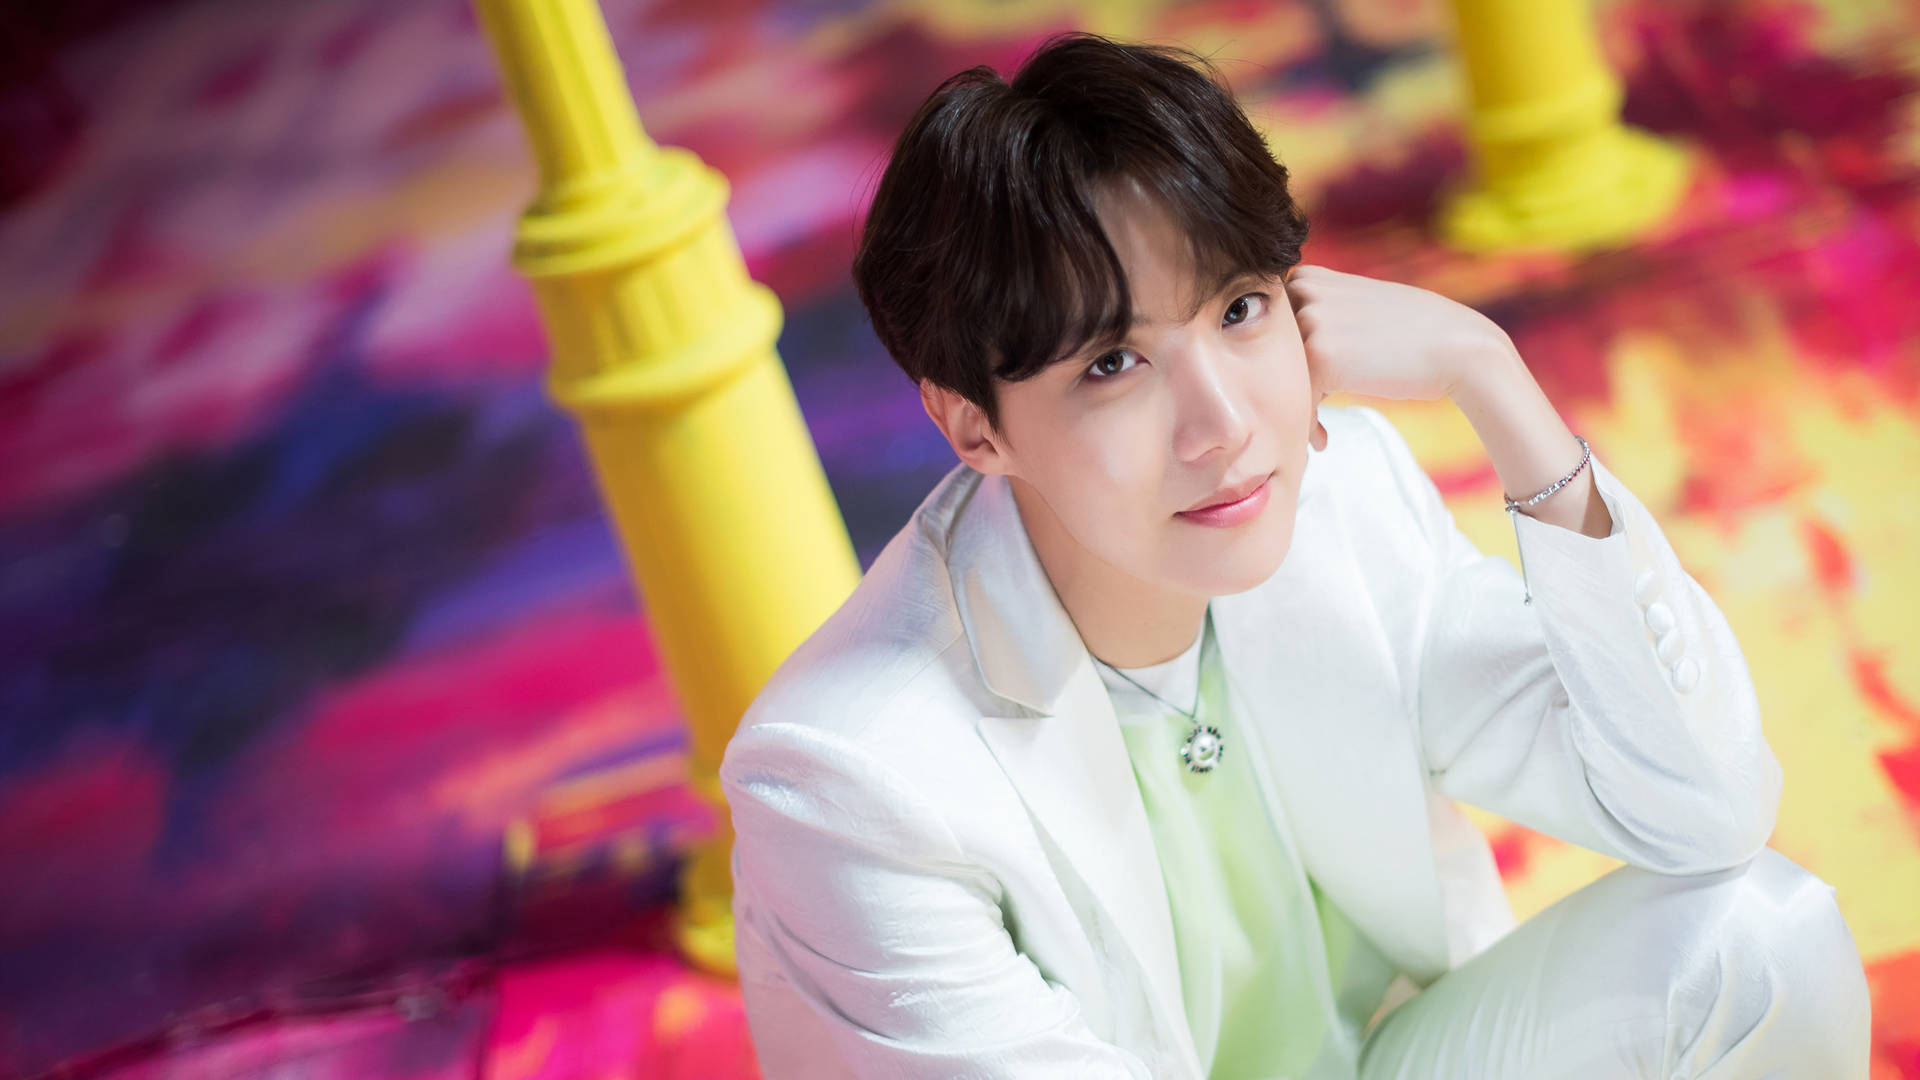 Boy With Luv J-hope Background